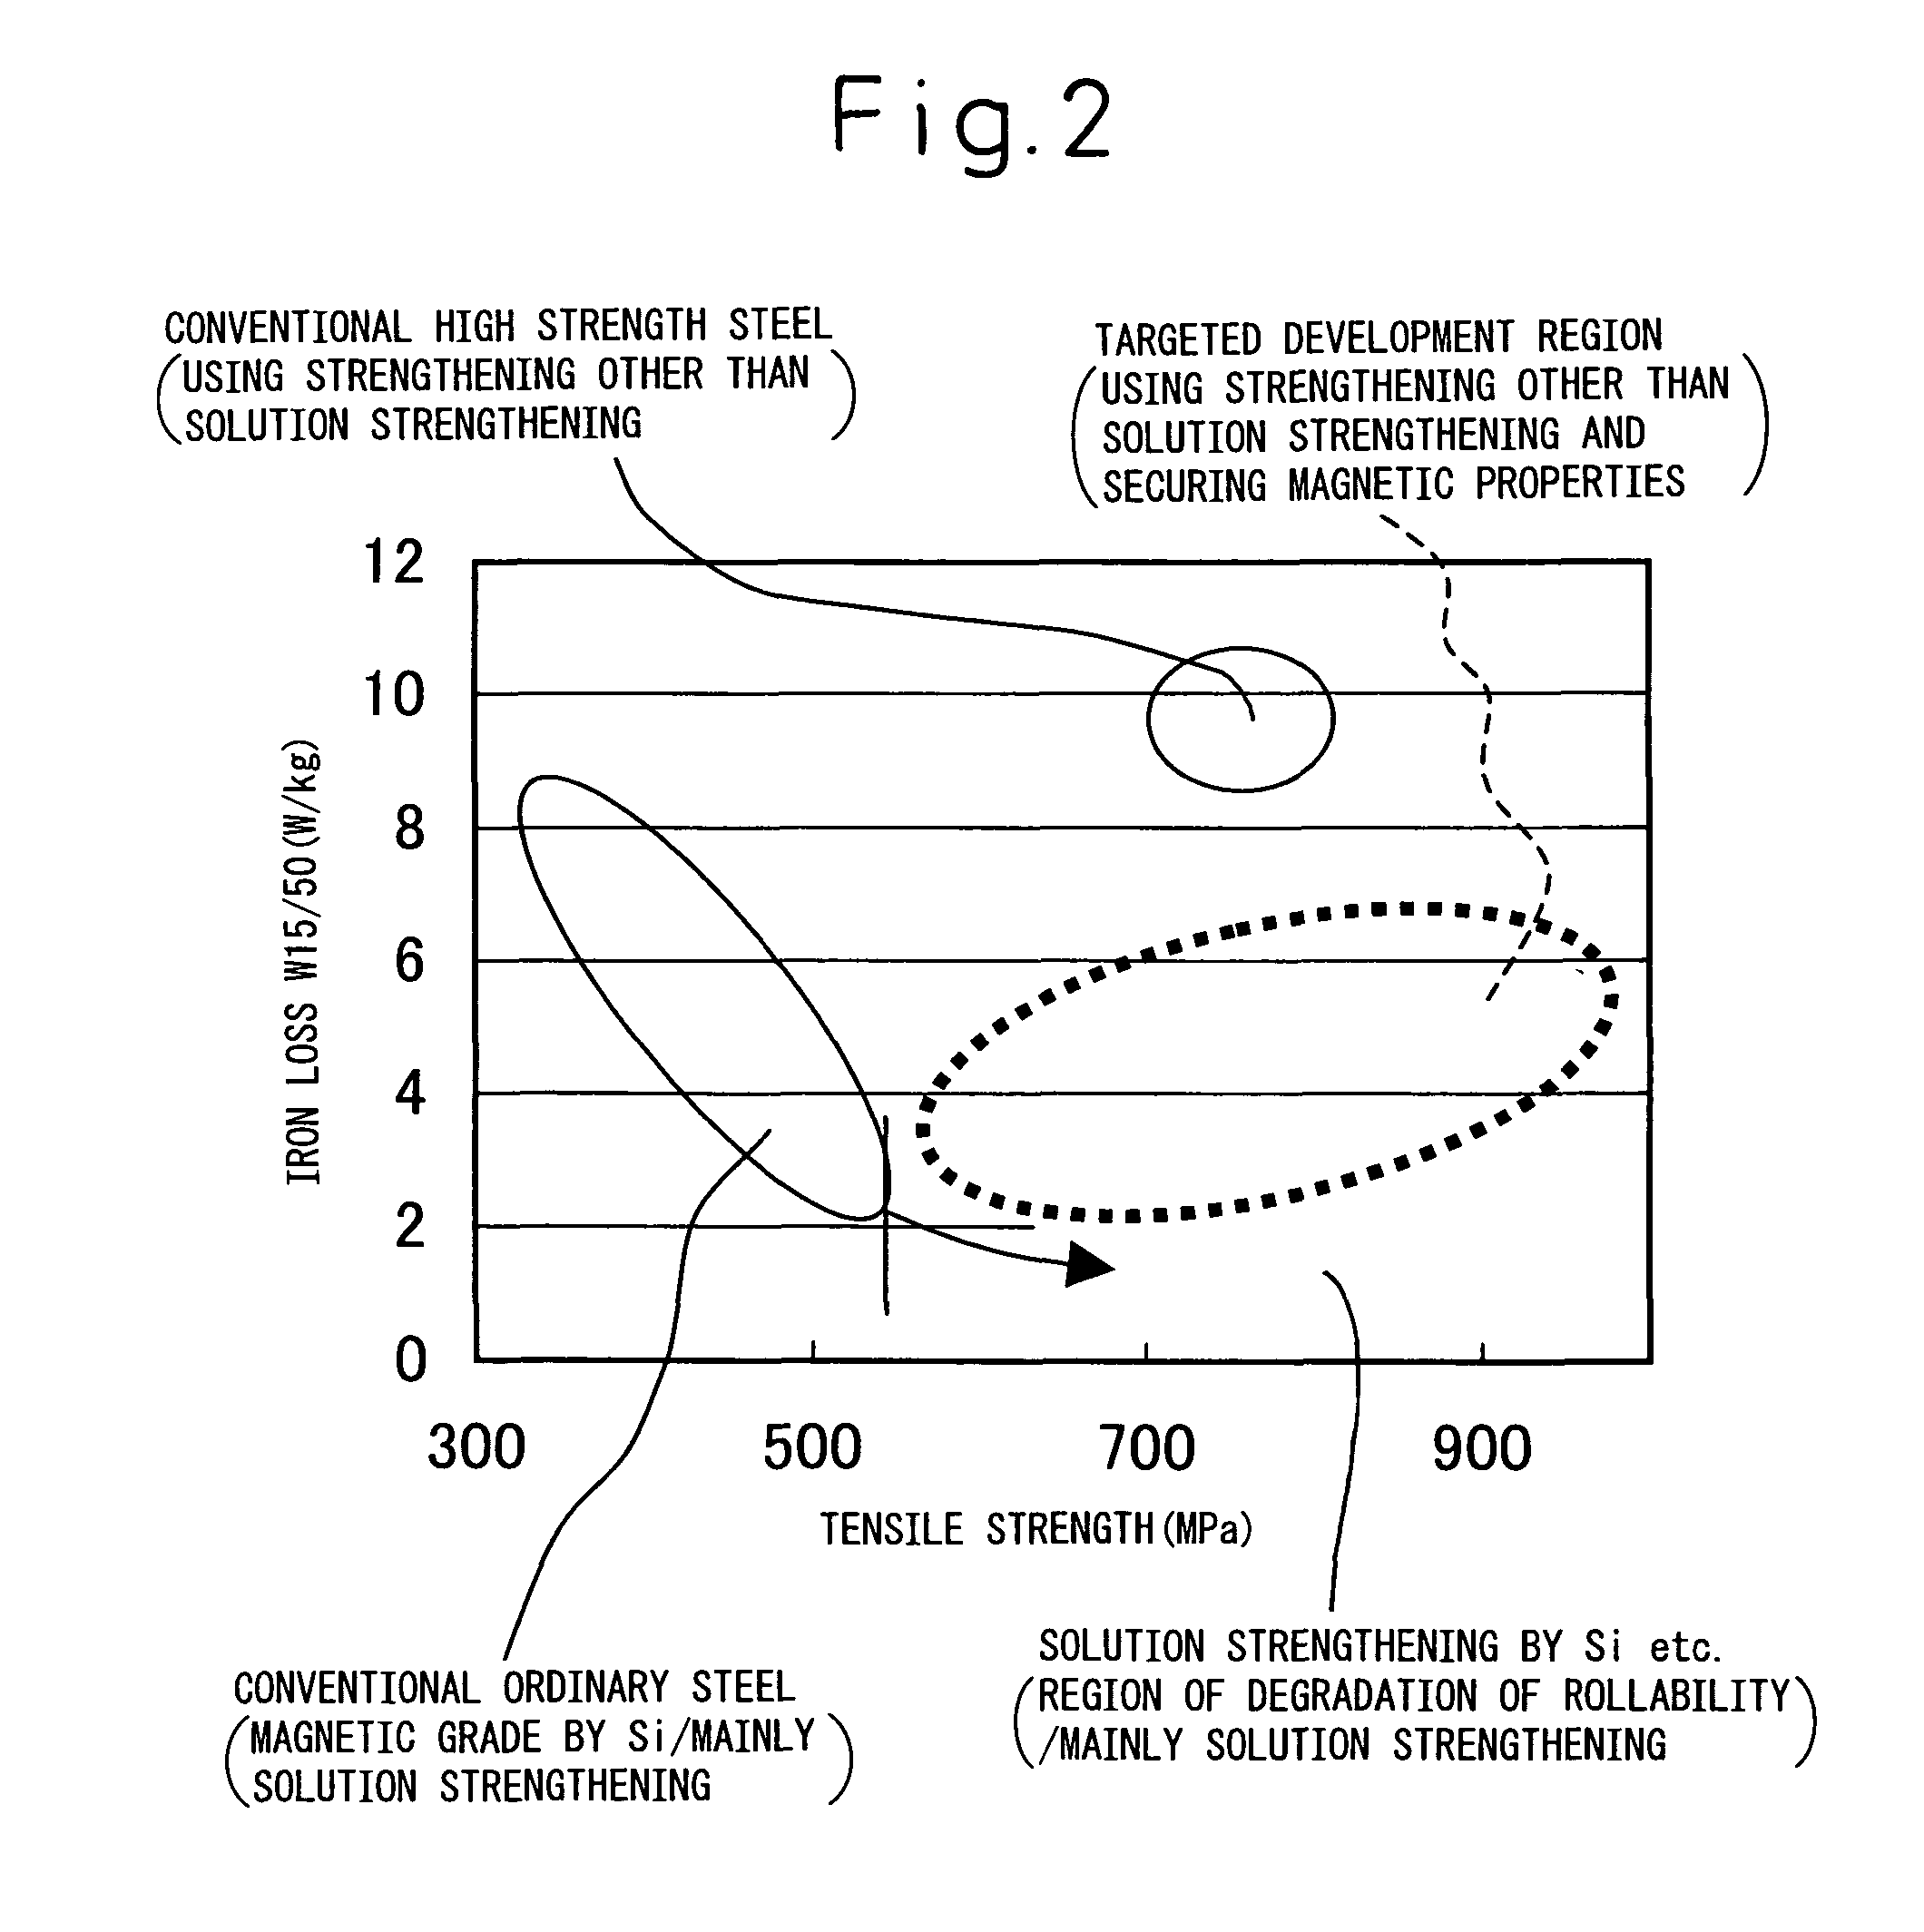 High-strength electrical steel sheet and processed part of same